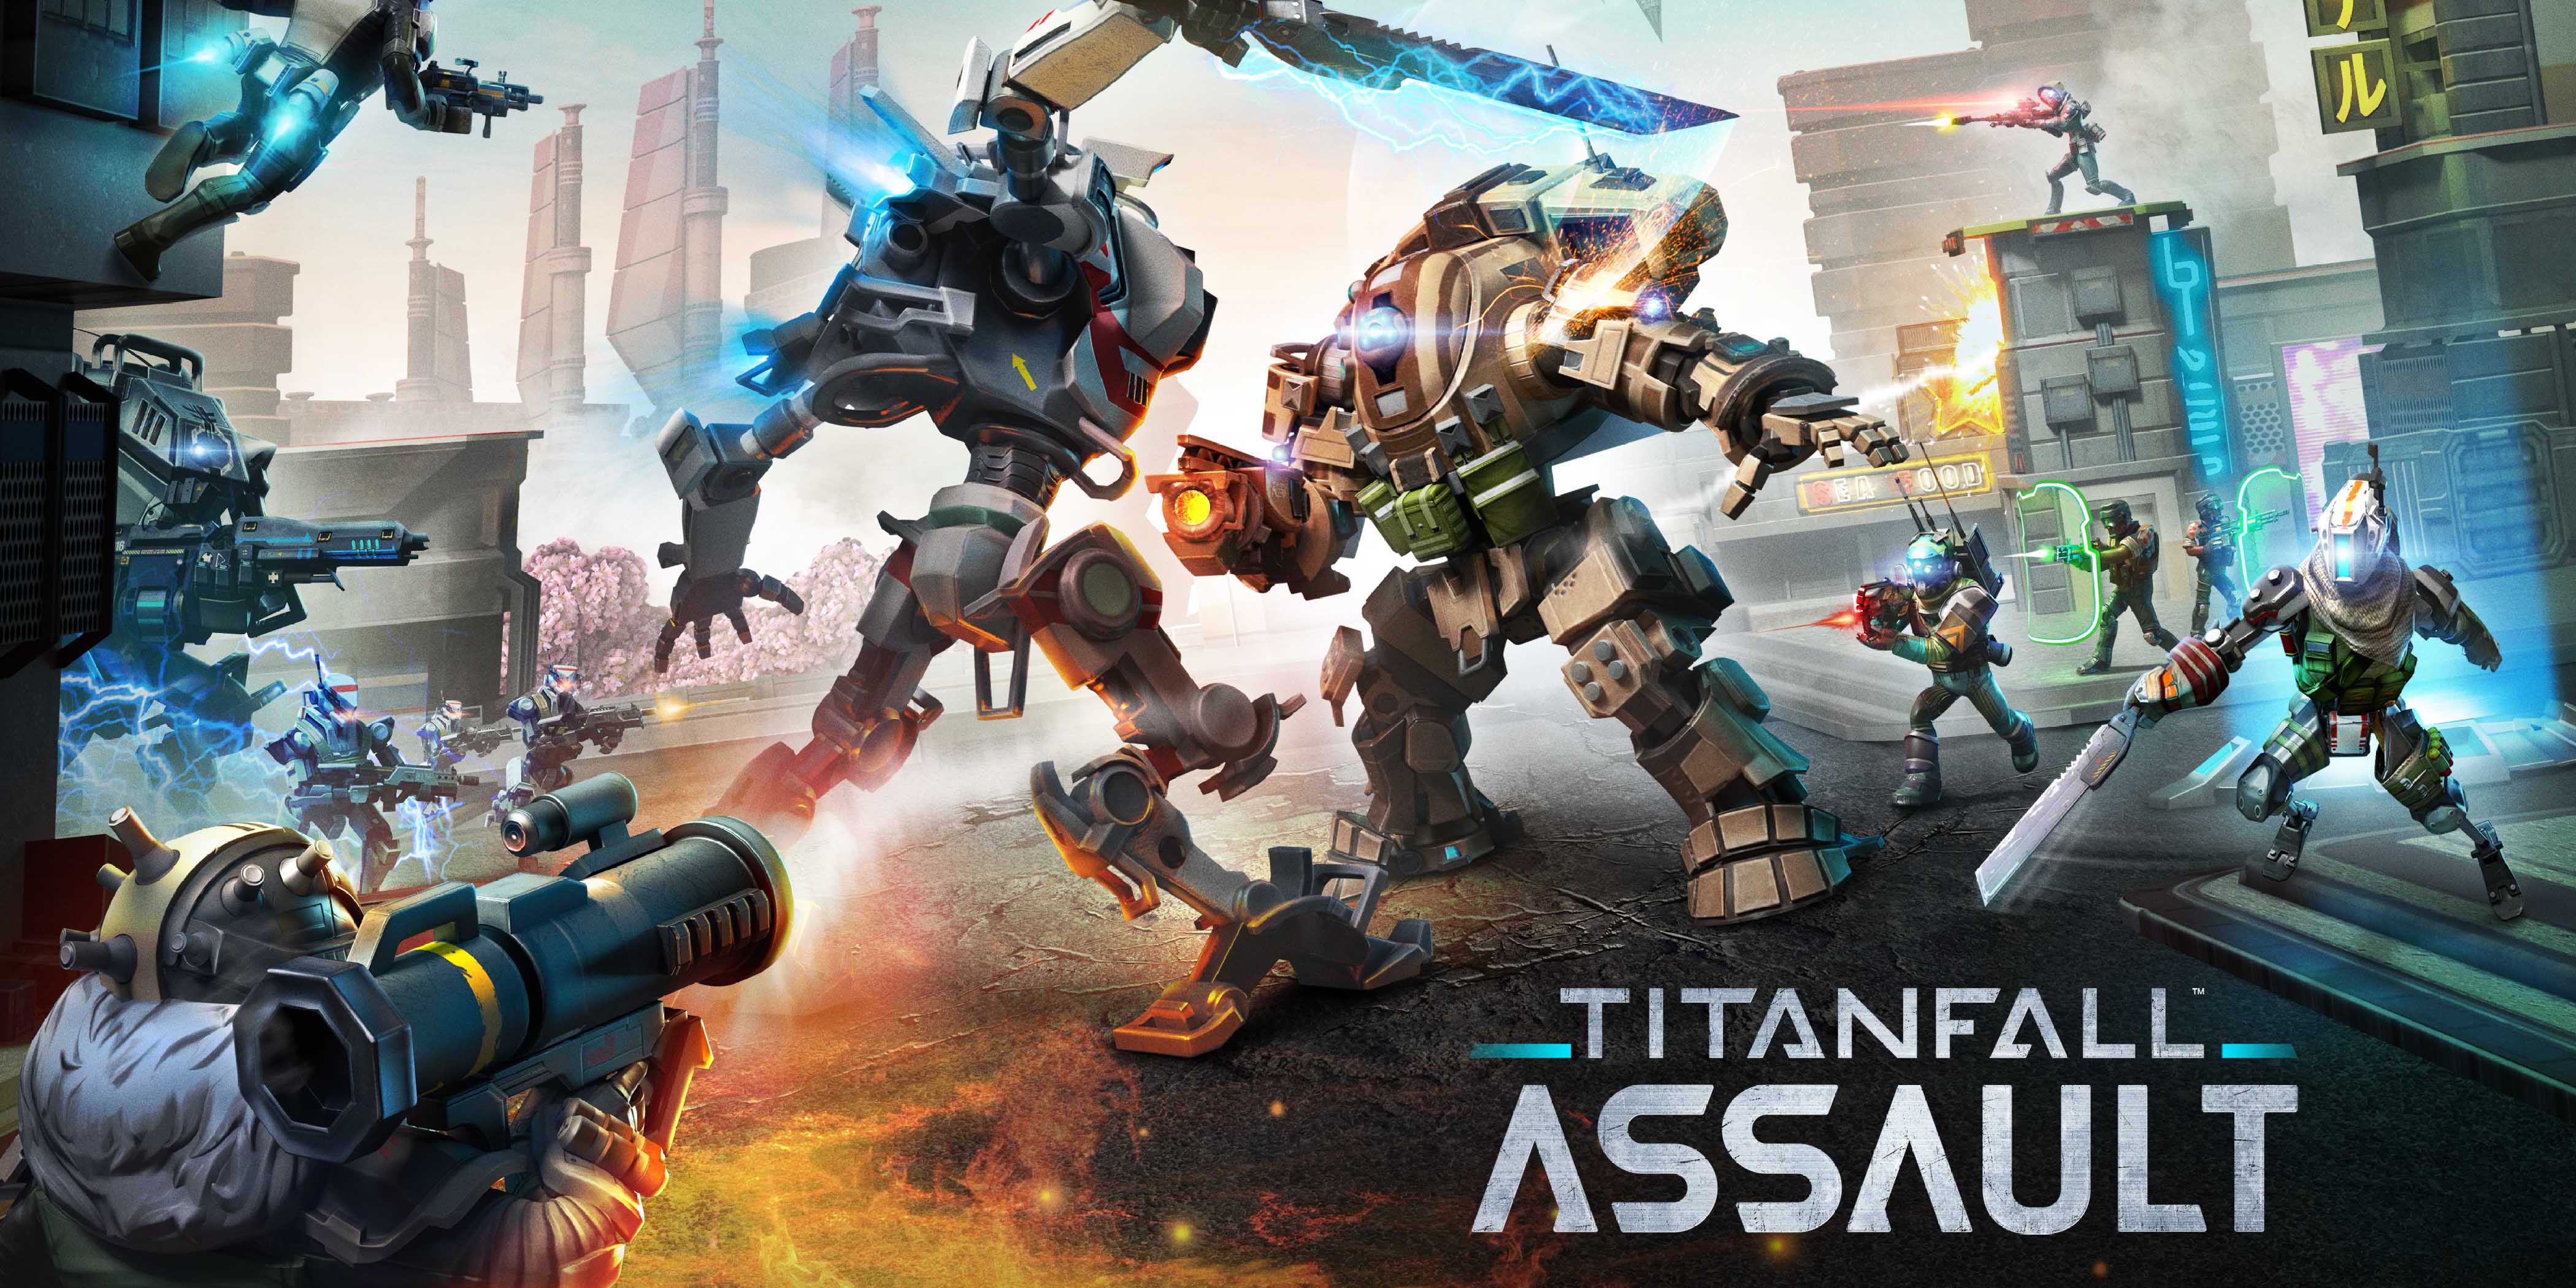 Respawn brings Titanfall to iOS with a new PvP RTS game - 9to5Mac